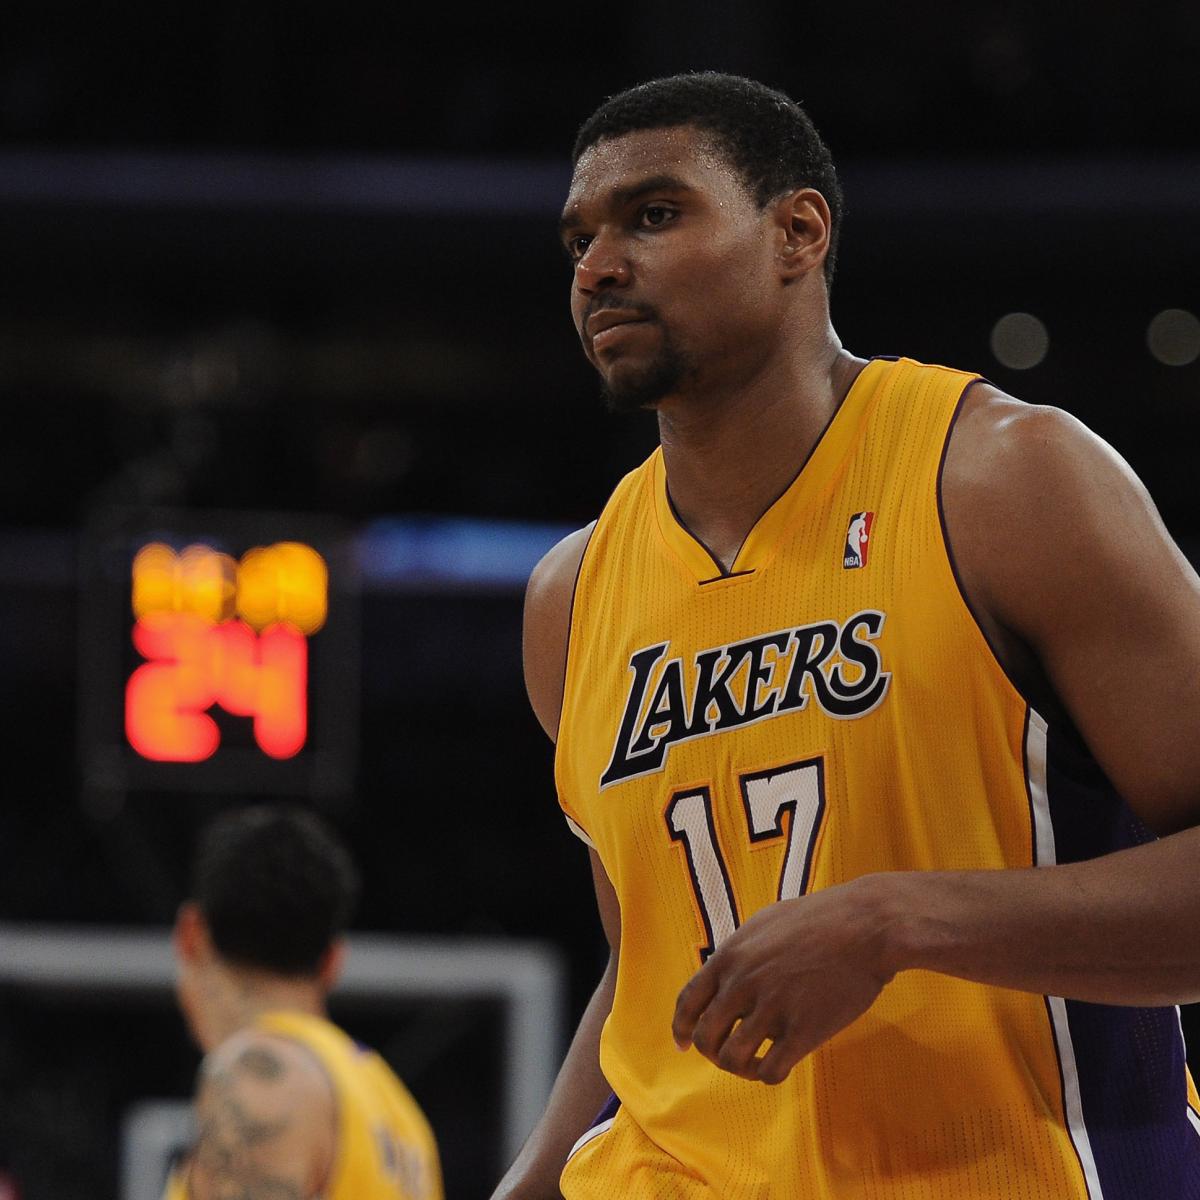 Andrew Bynum Beastly Performance on Glass Proves How Good He and